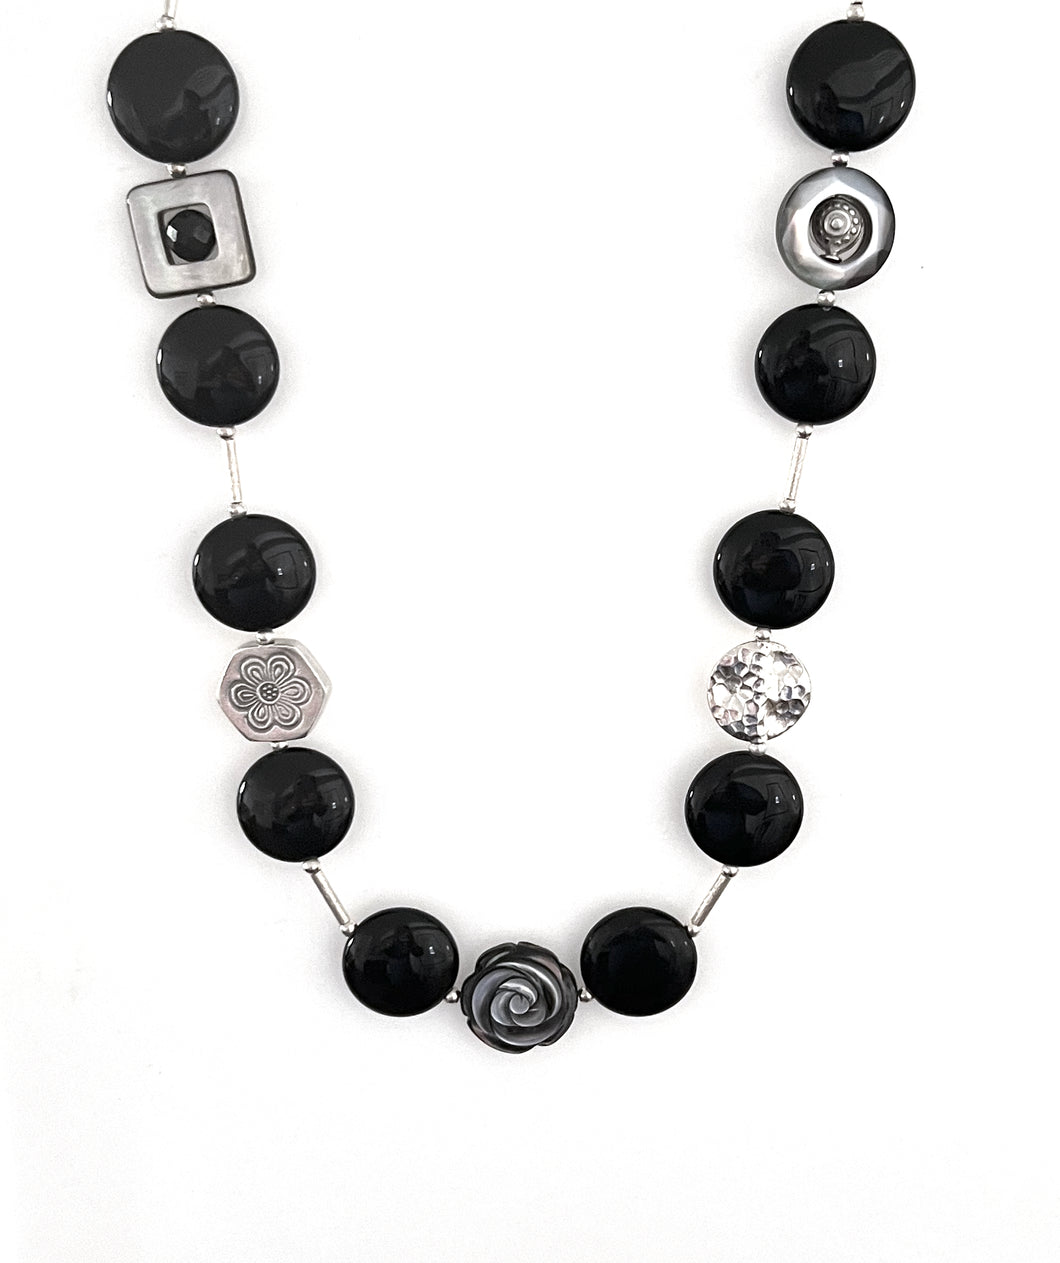 Australian Handmade Black Necklace with Onyx Mother of Pearl and Sterling Silver